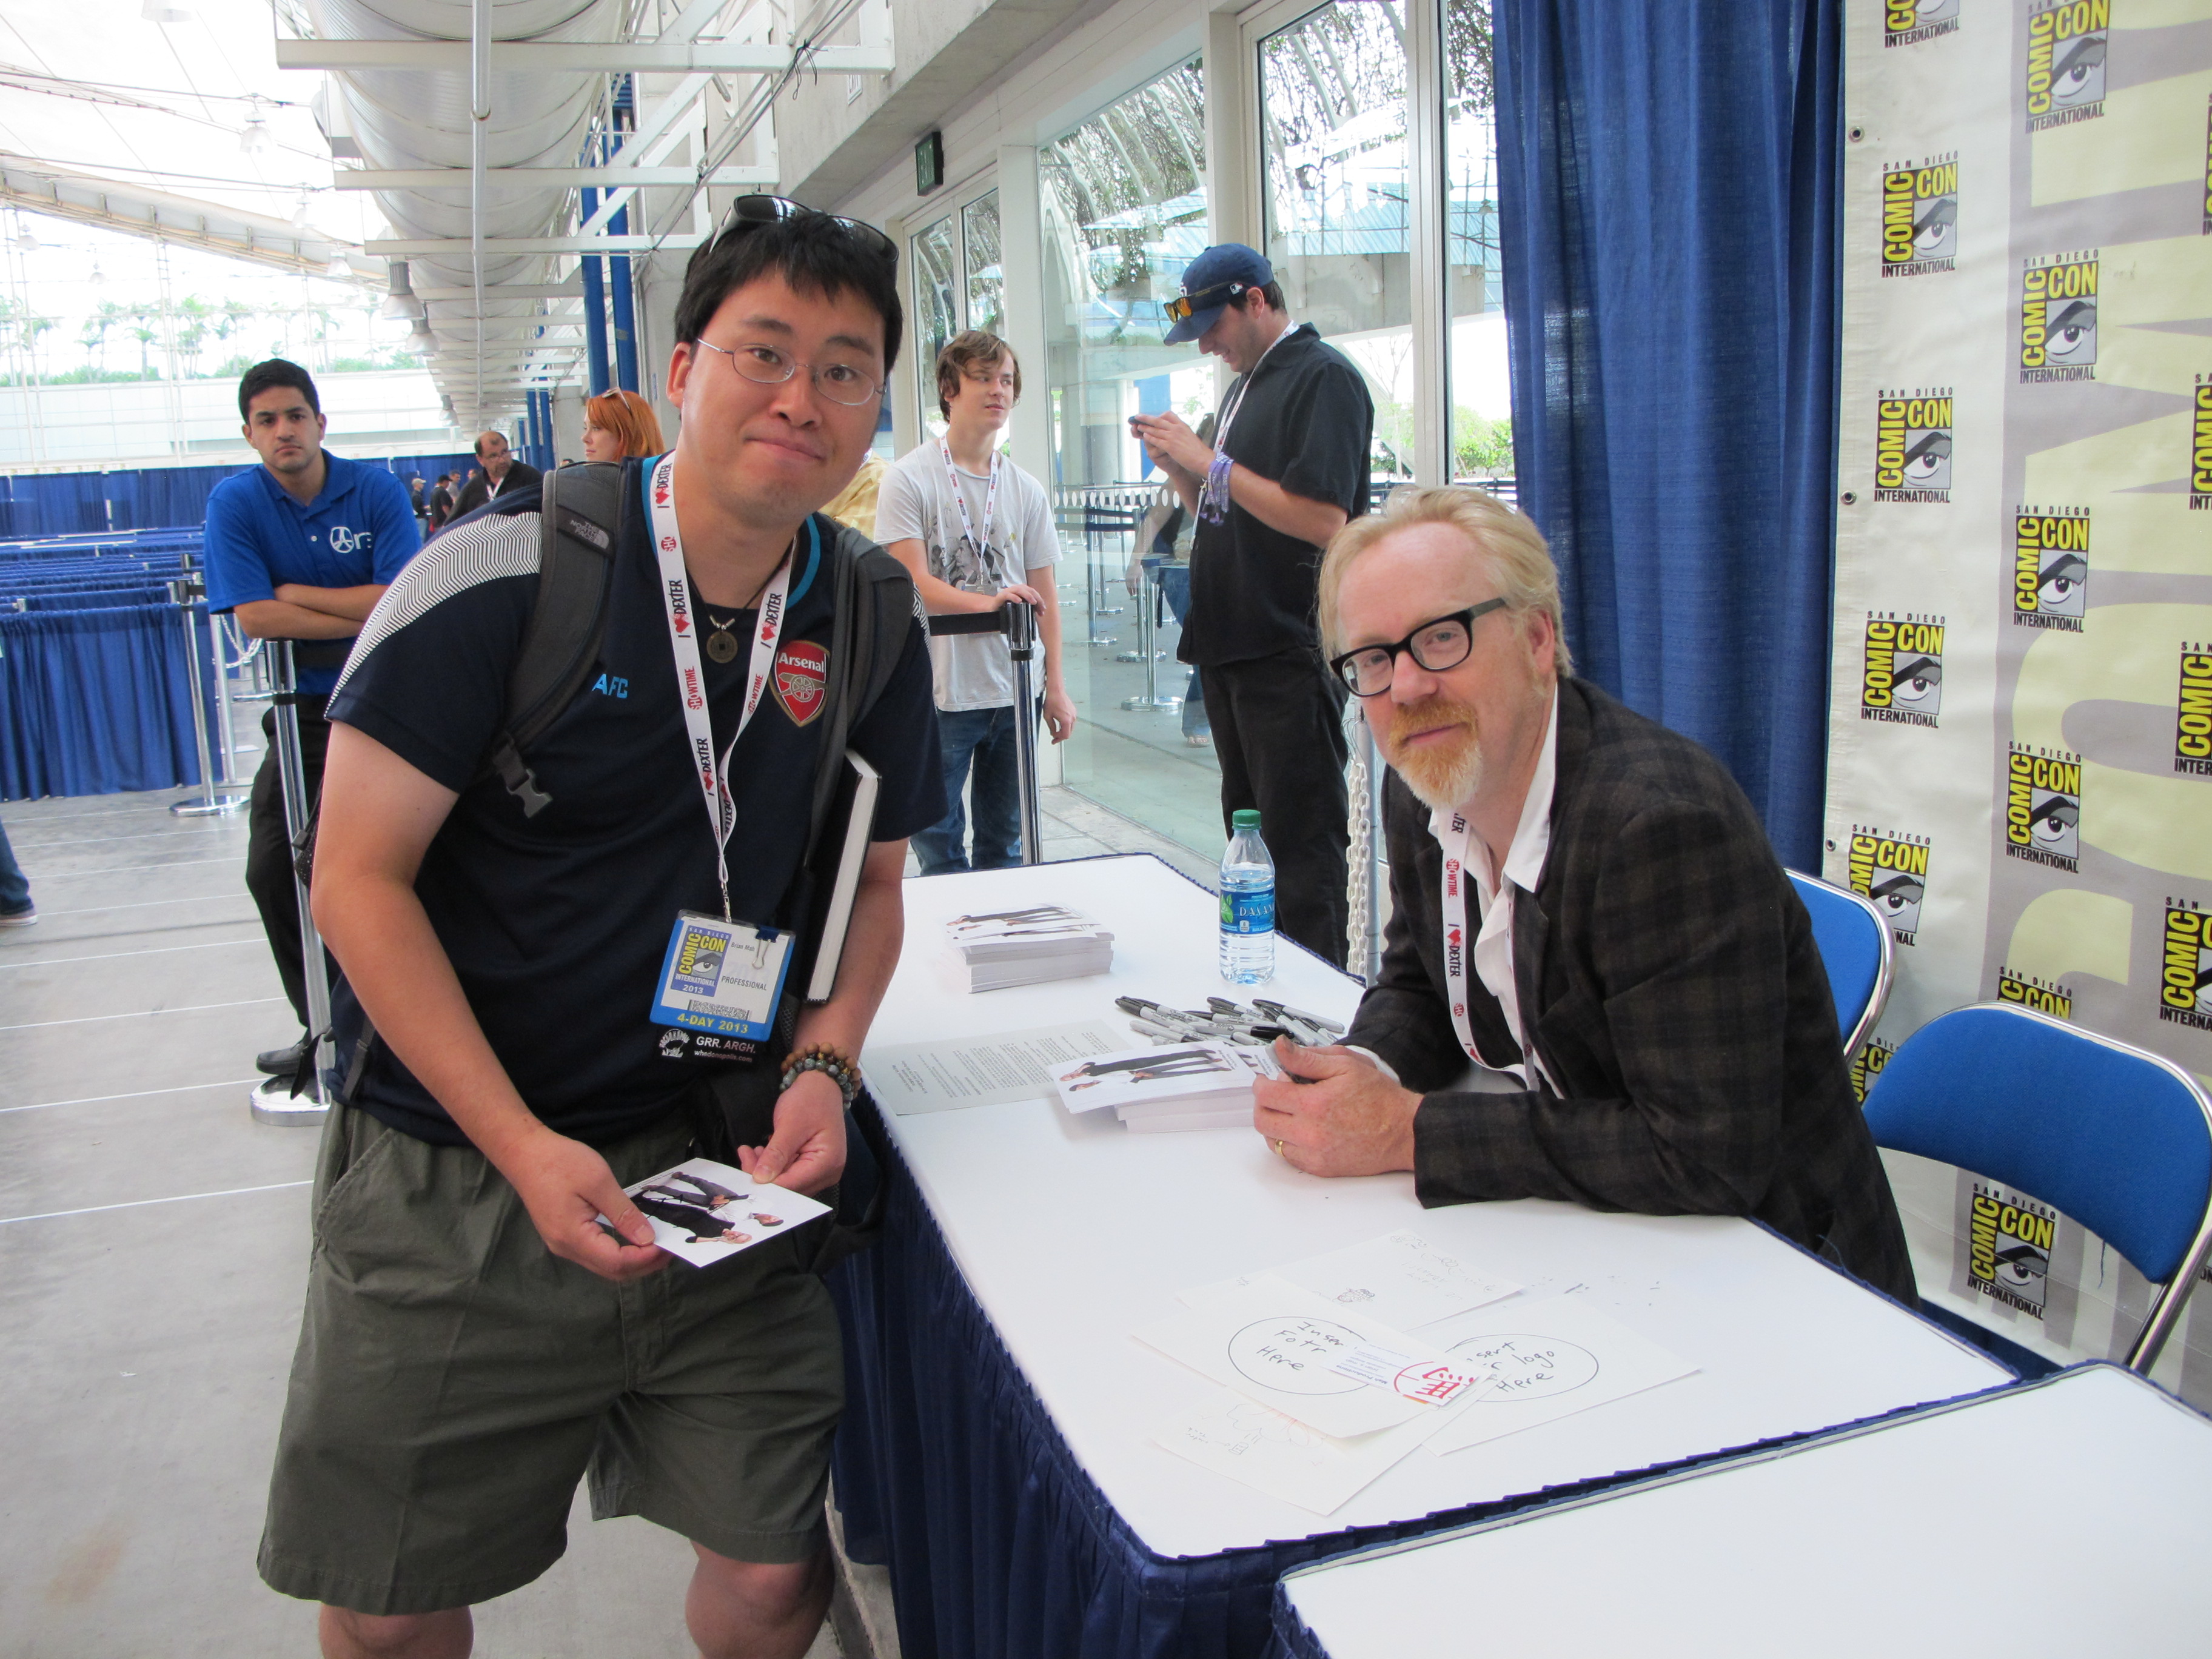 Adam Savage (Mythbusters) and I at SDCC 2013.